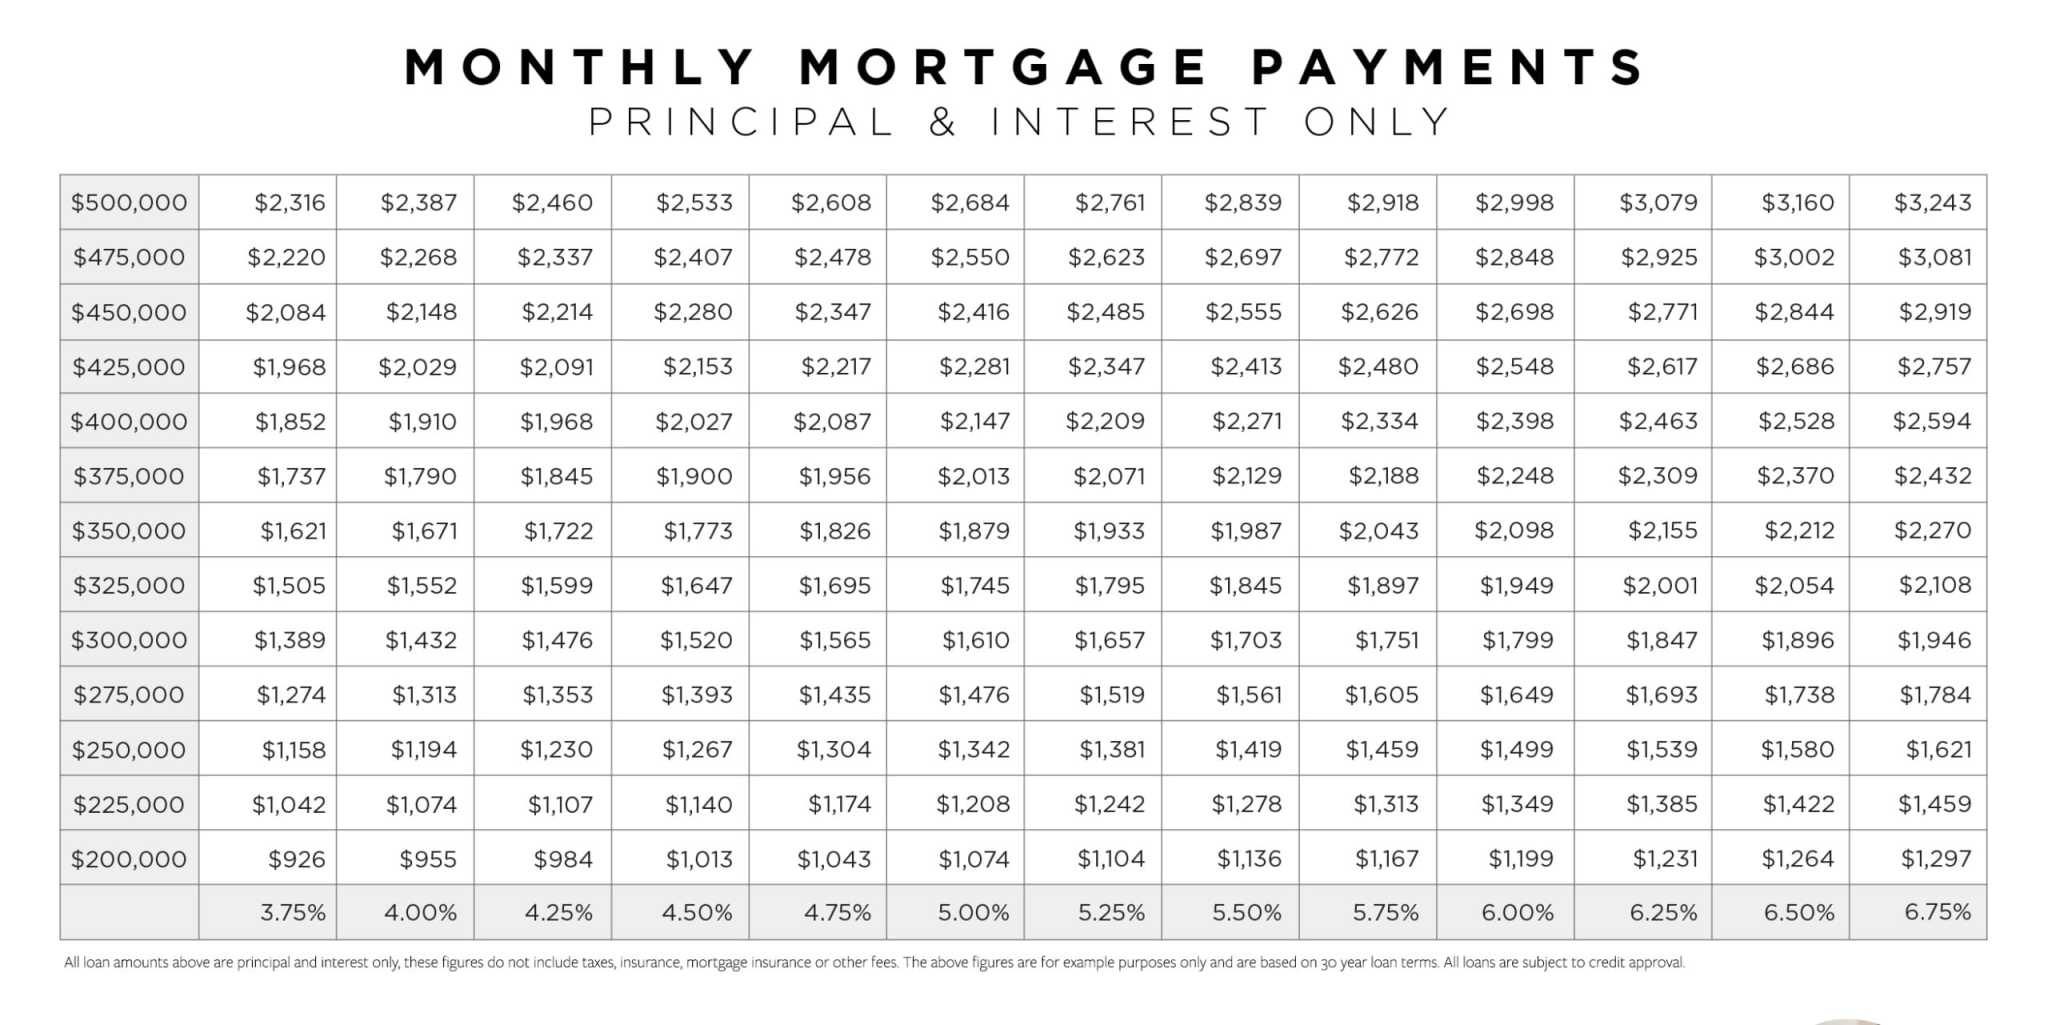 understanding-interest-rates-your-mortgage-2020-guide